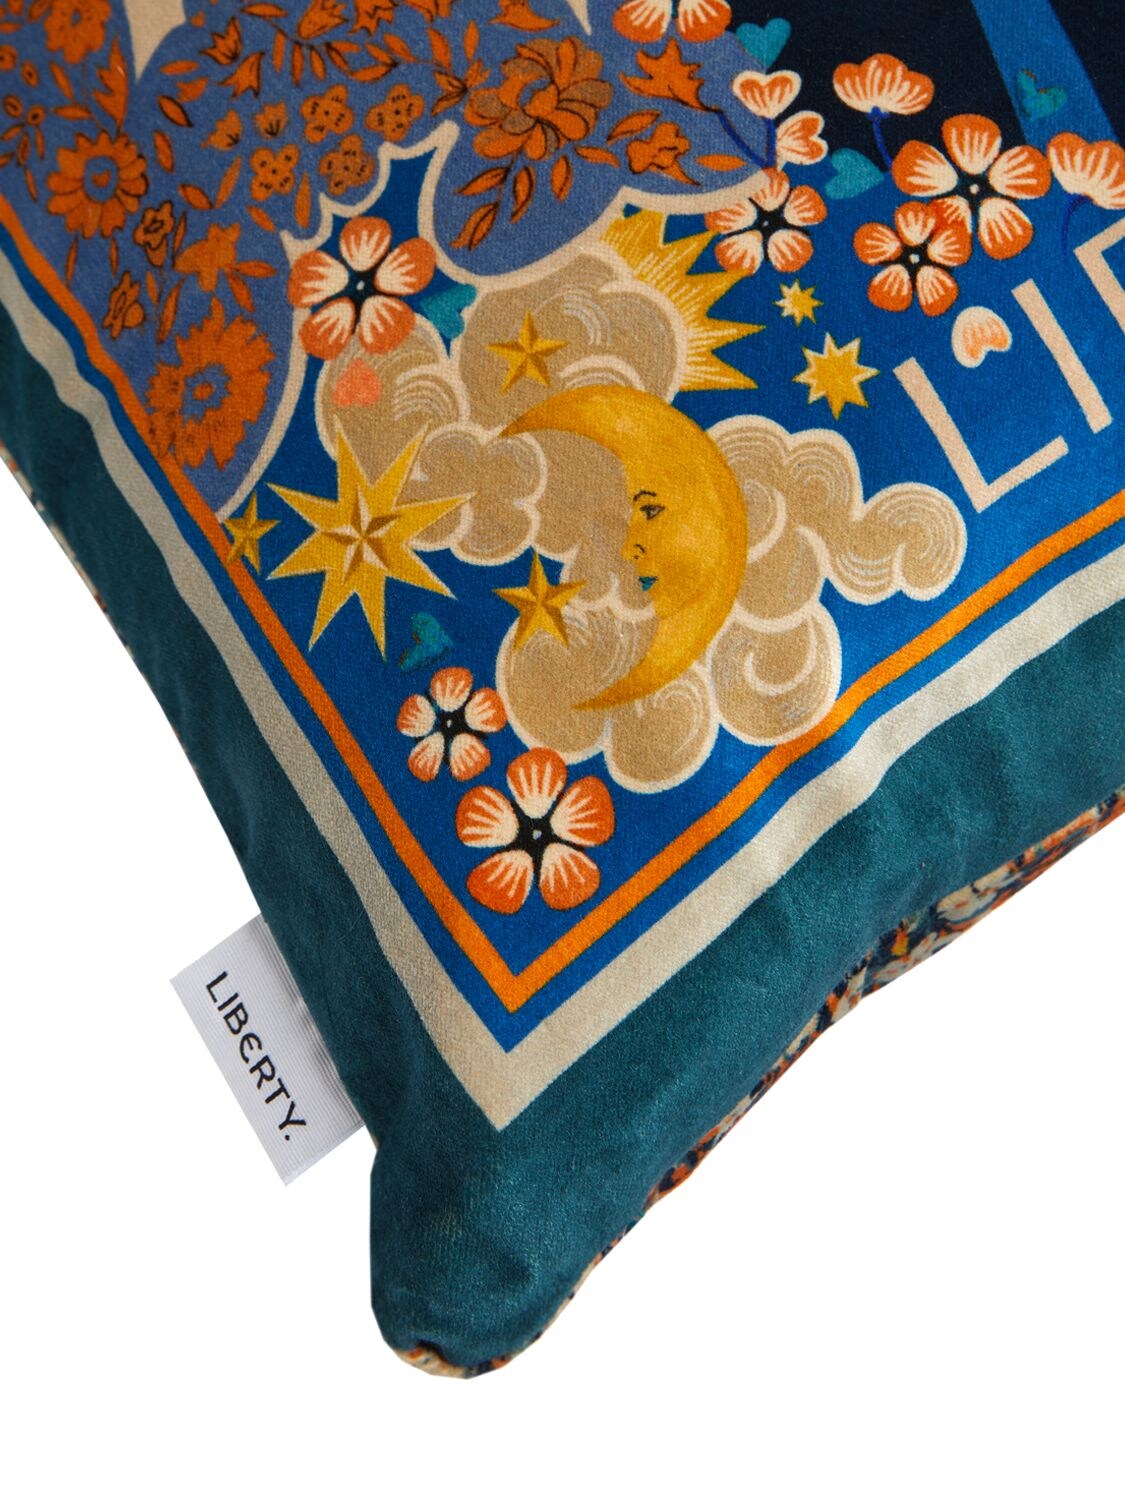 Shop Liberty All You Need Is Love Velvet Cushion In Multicolor